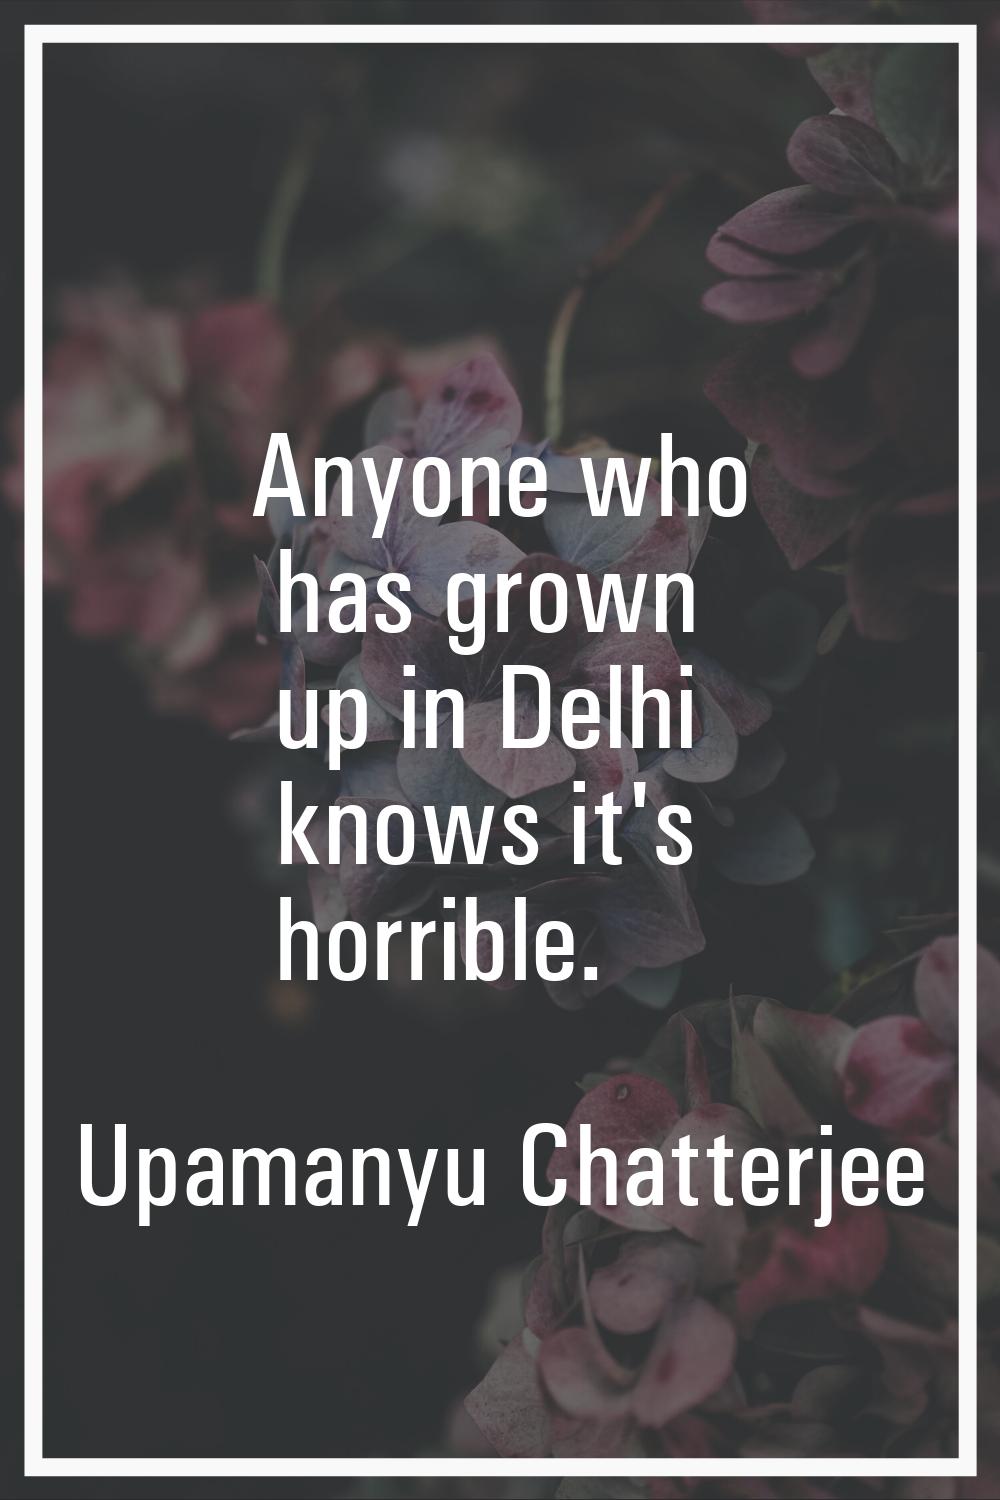 Anyone who has grown up in Delhi knows it's horrible.